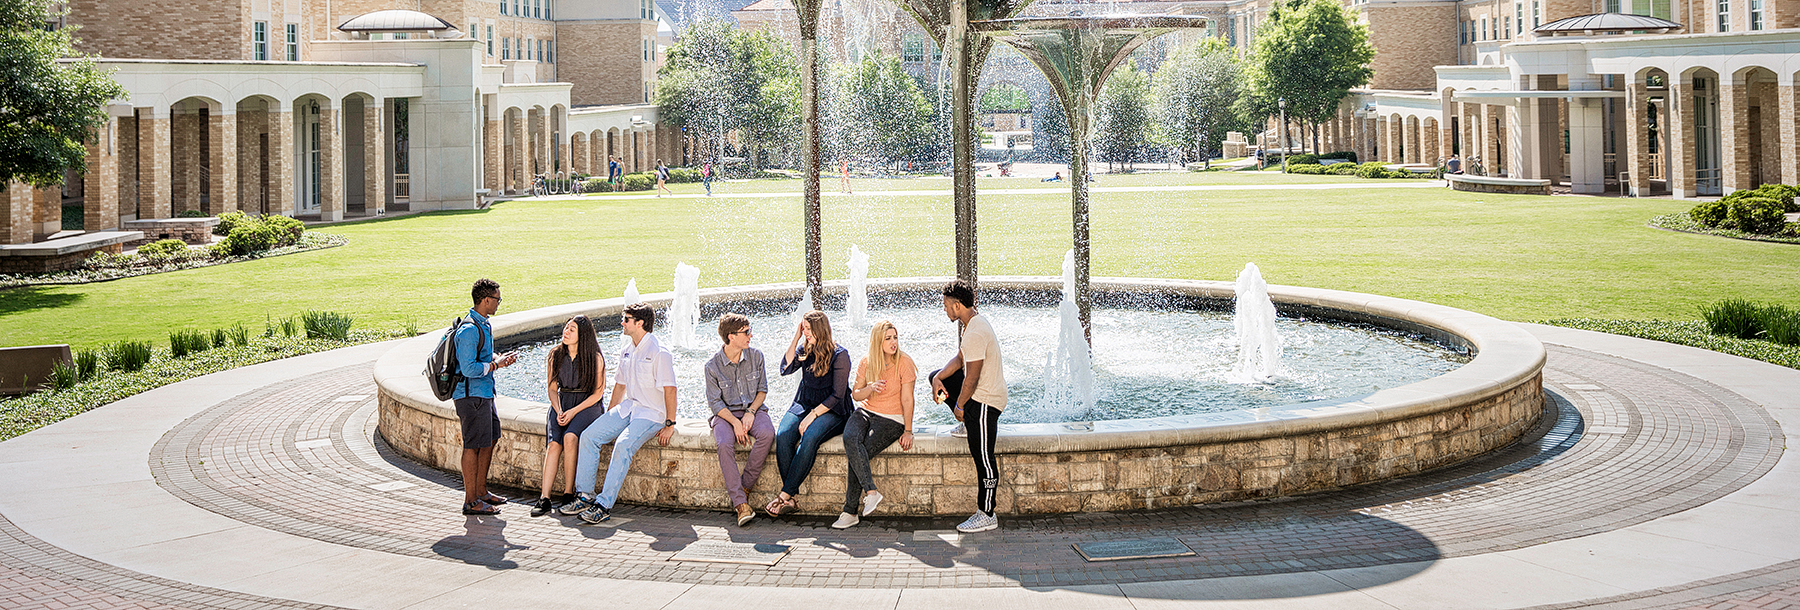 Section Image: Students at Frog Fountain 